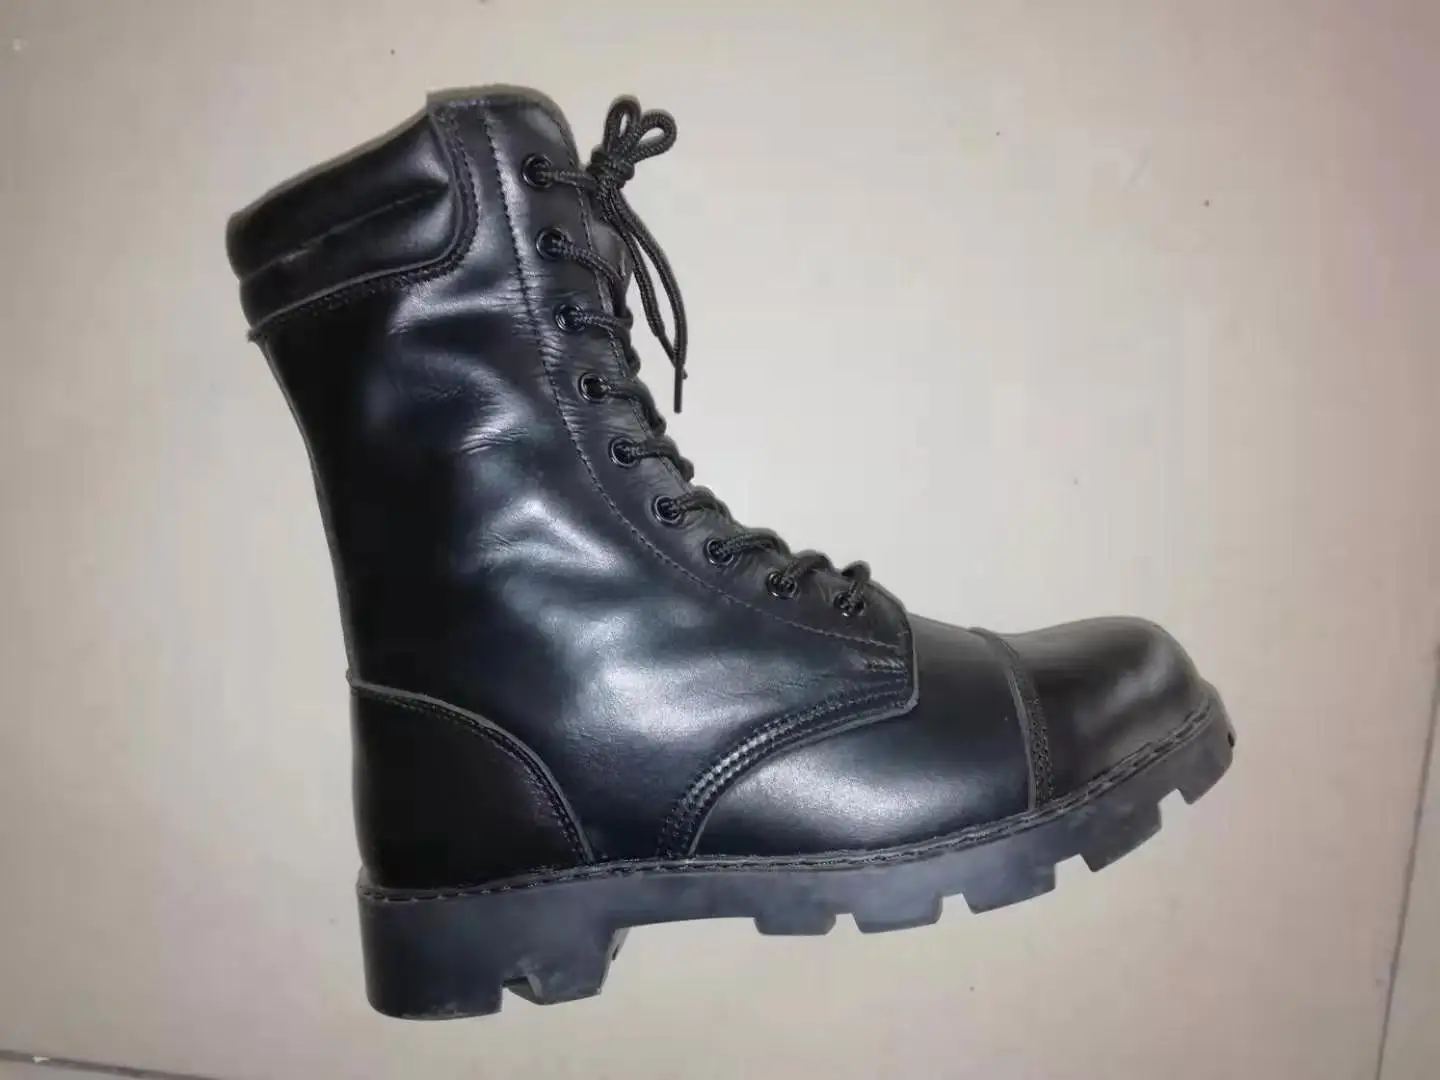 Cheap Full Leather Combat Black Nepal Army Boots - Buy Black Nepal Army ...